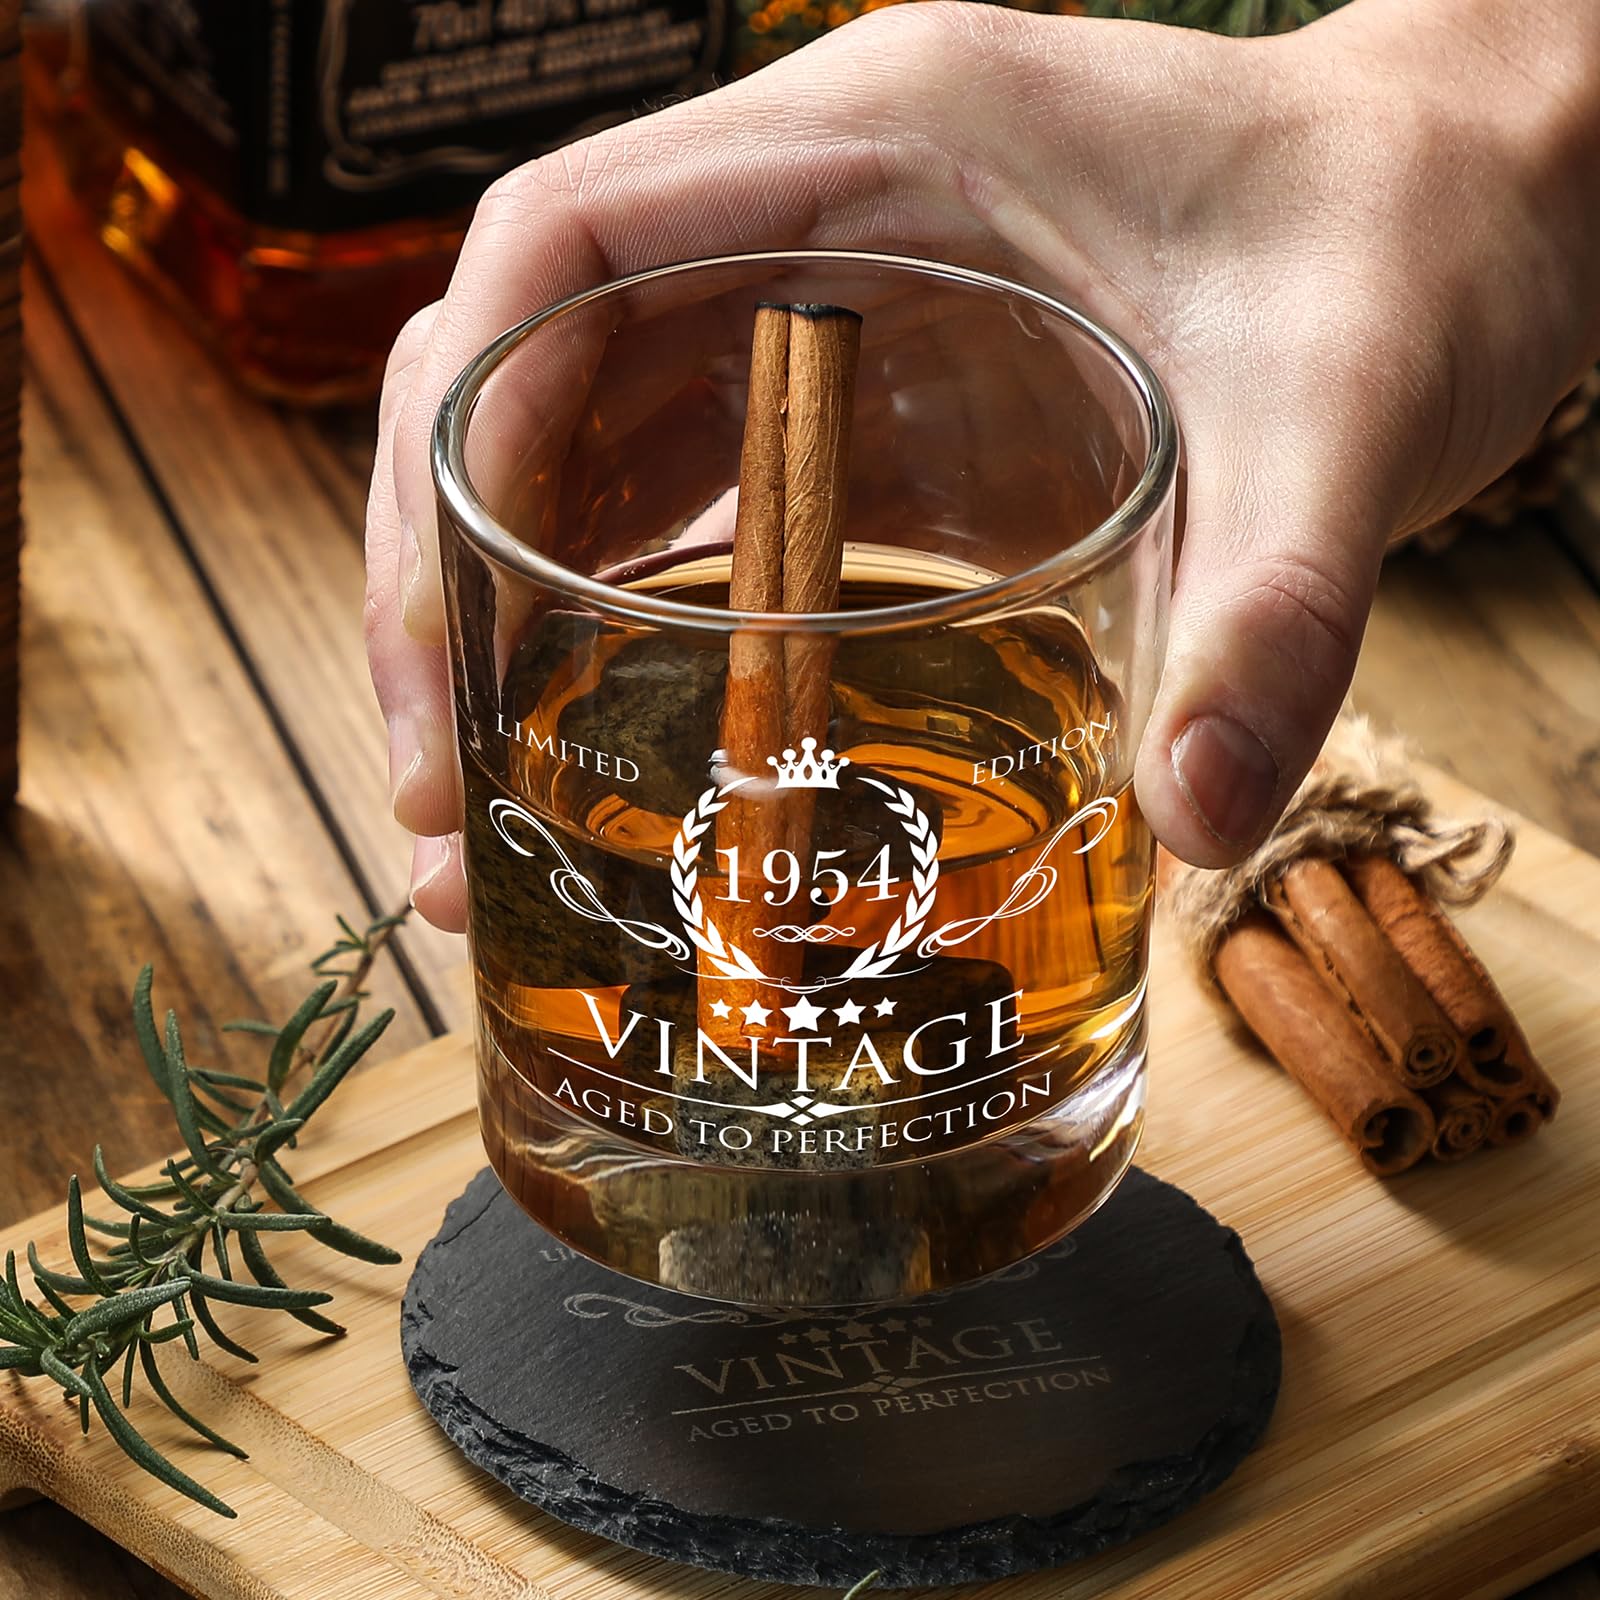 70th Birthday Gifts for Men Whiskey Glass Set - 70th Birthday Decorations, Party Supplies - 70 Year Anniversary, Bday Gifts Ideas for Him, Dad, Husband, Friends - Wood Box & Whiskey Stones & Coaster